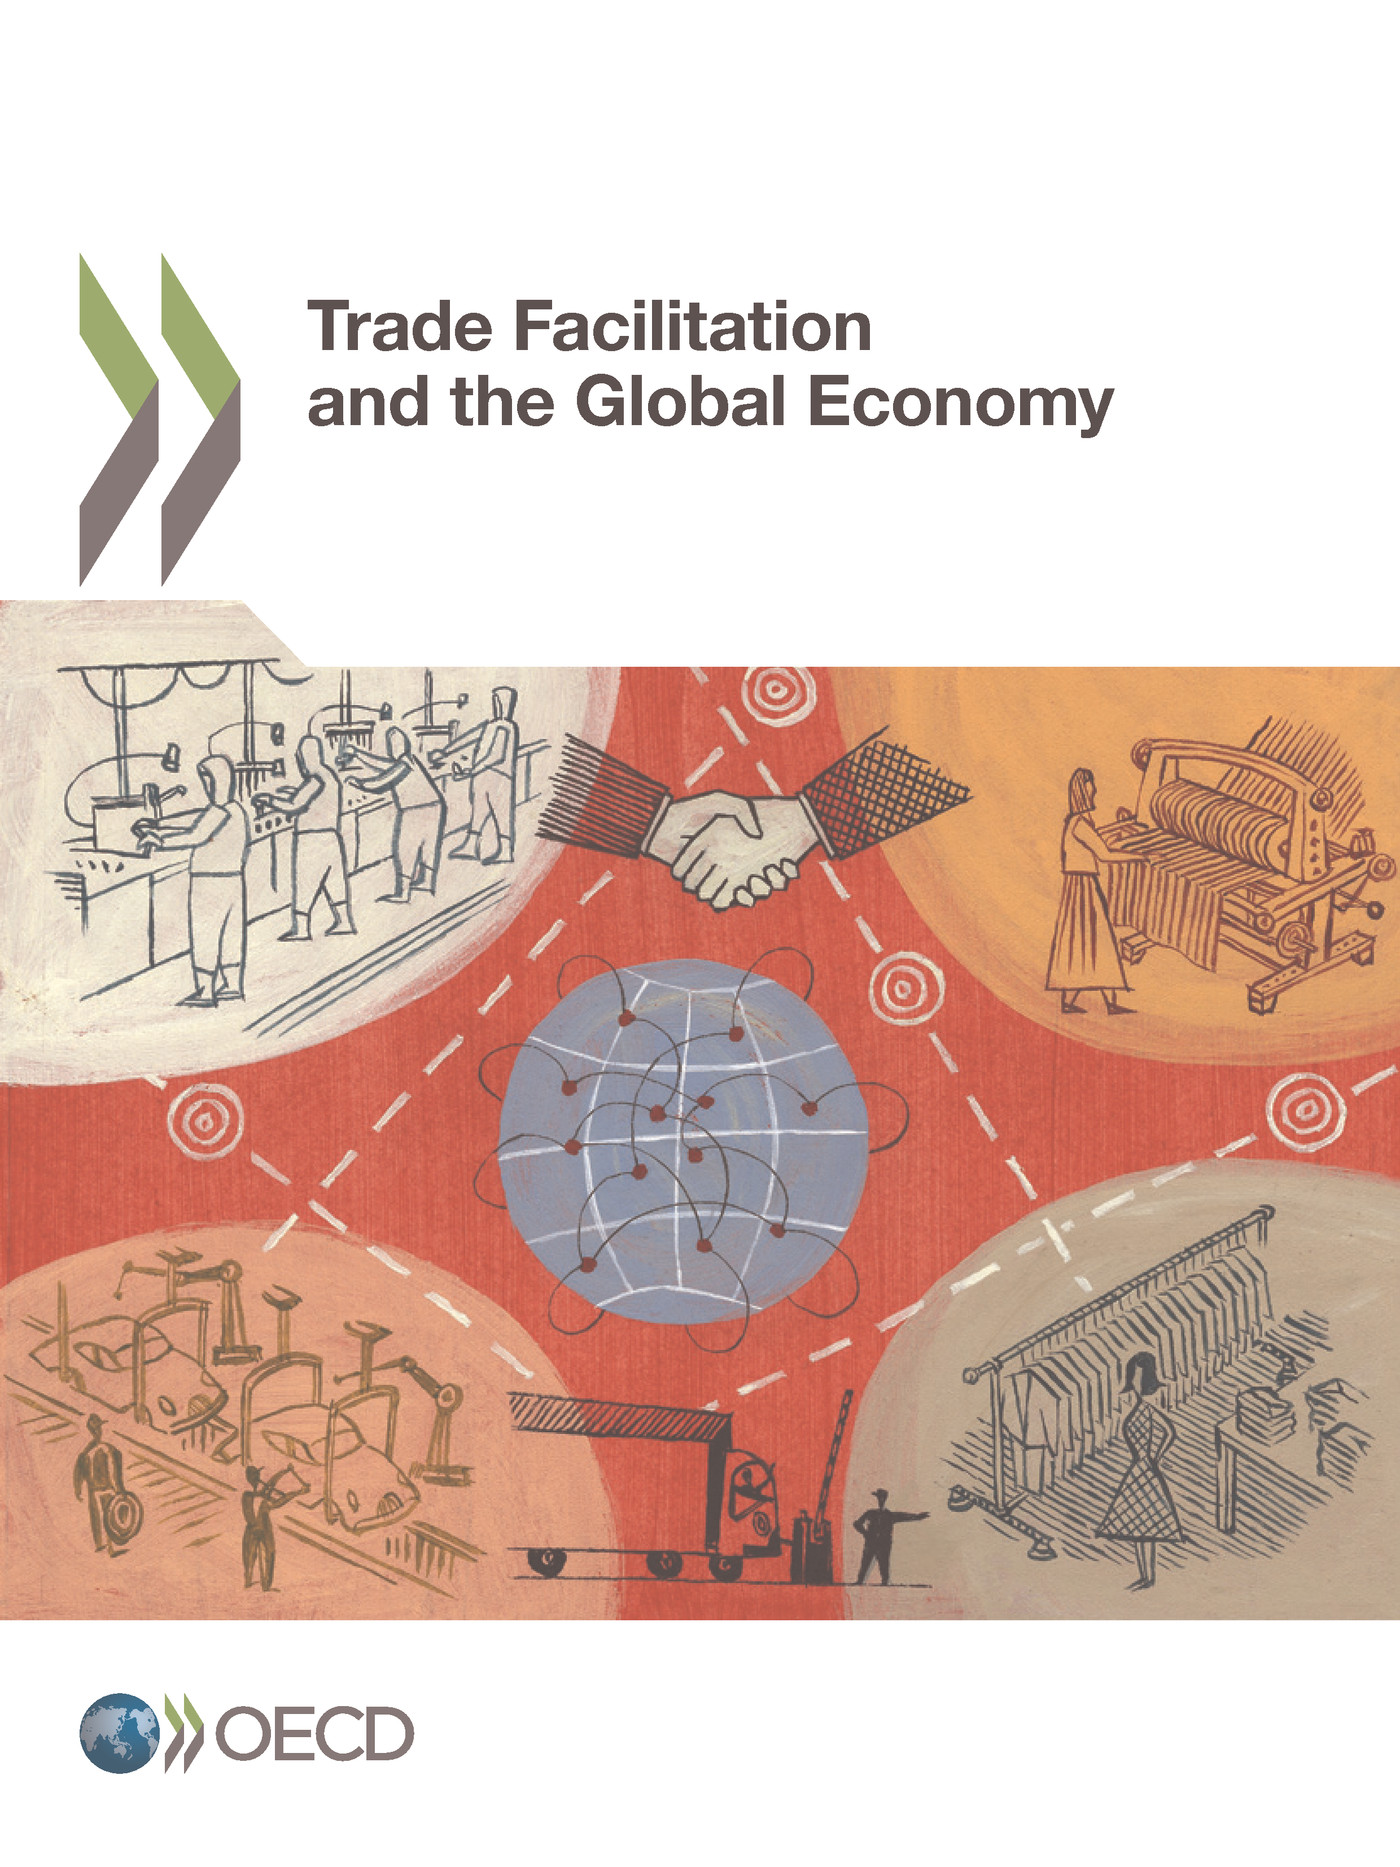 Trade Facilitation and the Global Economy -  Collectif - OCDE / OECD